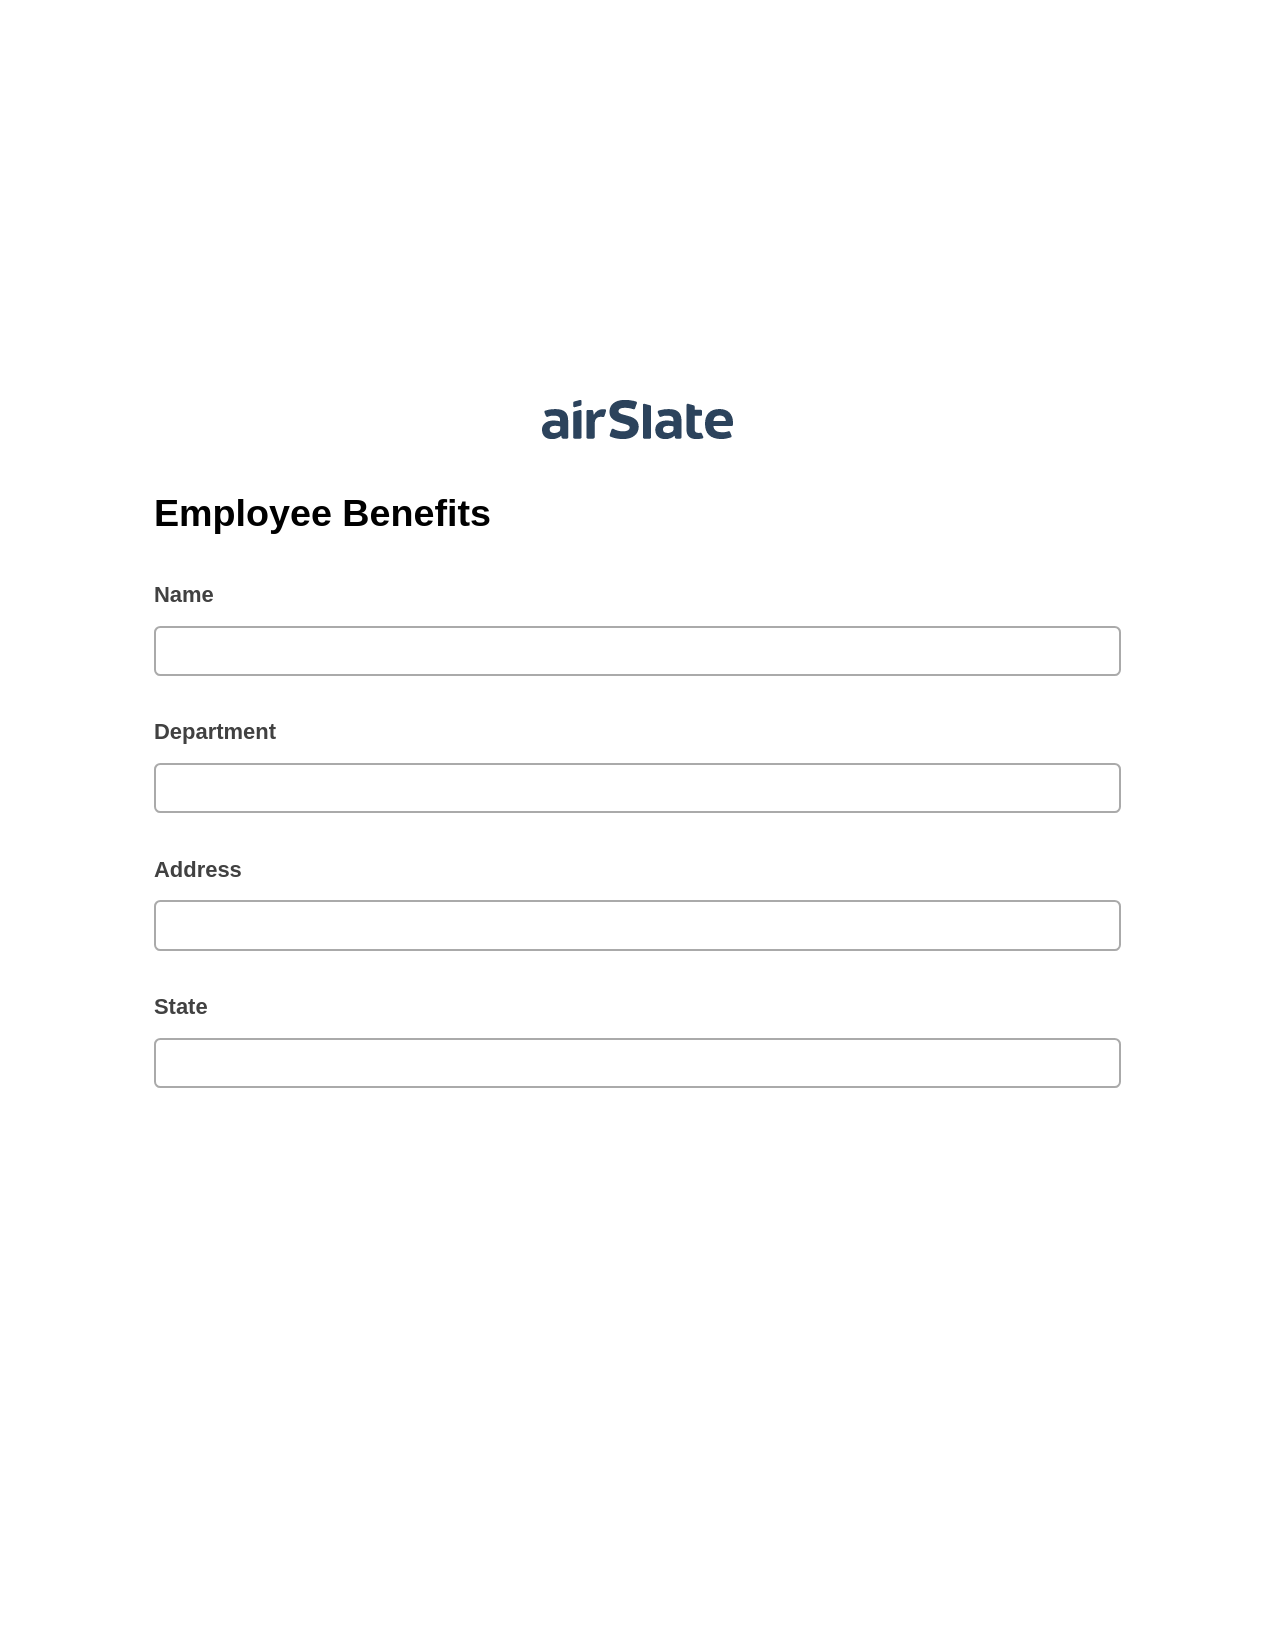 Employee Benefits Pre-fill Dropdowns from MySQL Bot, Export to MS Dynamics 365 Bot, Export to Formstack Documents Bot